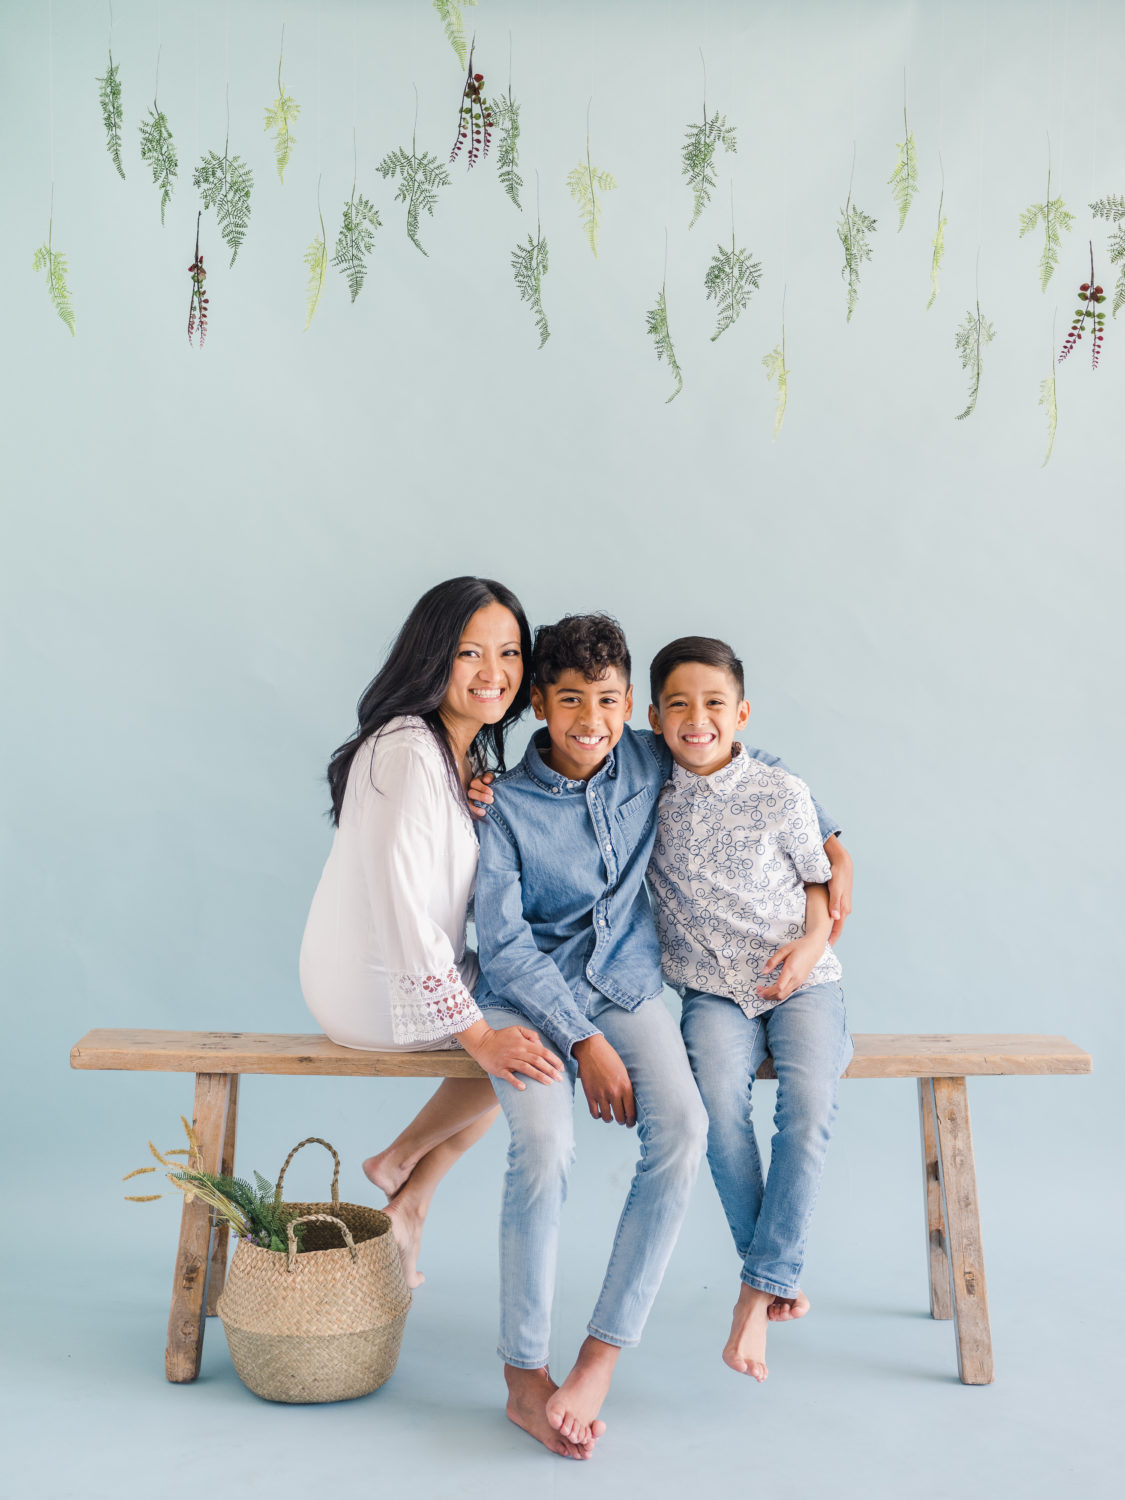 What to Wear for Your Spring Family Photo Shoot